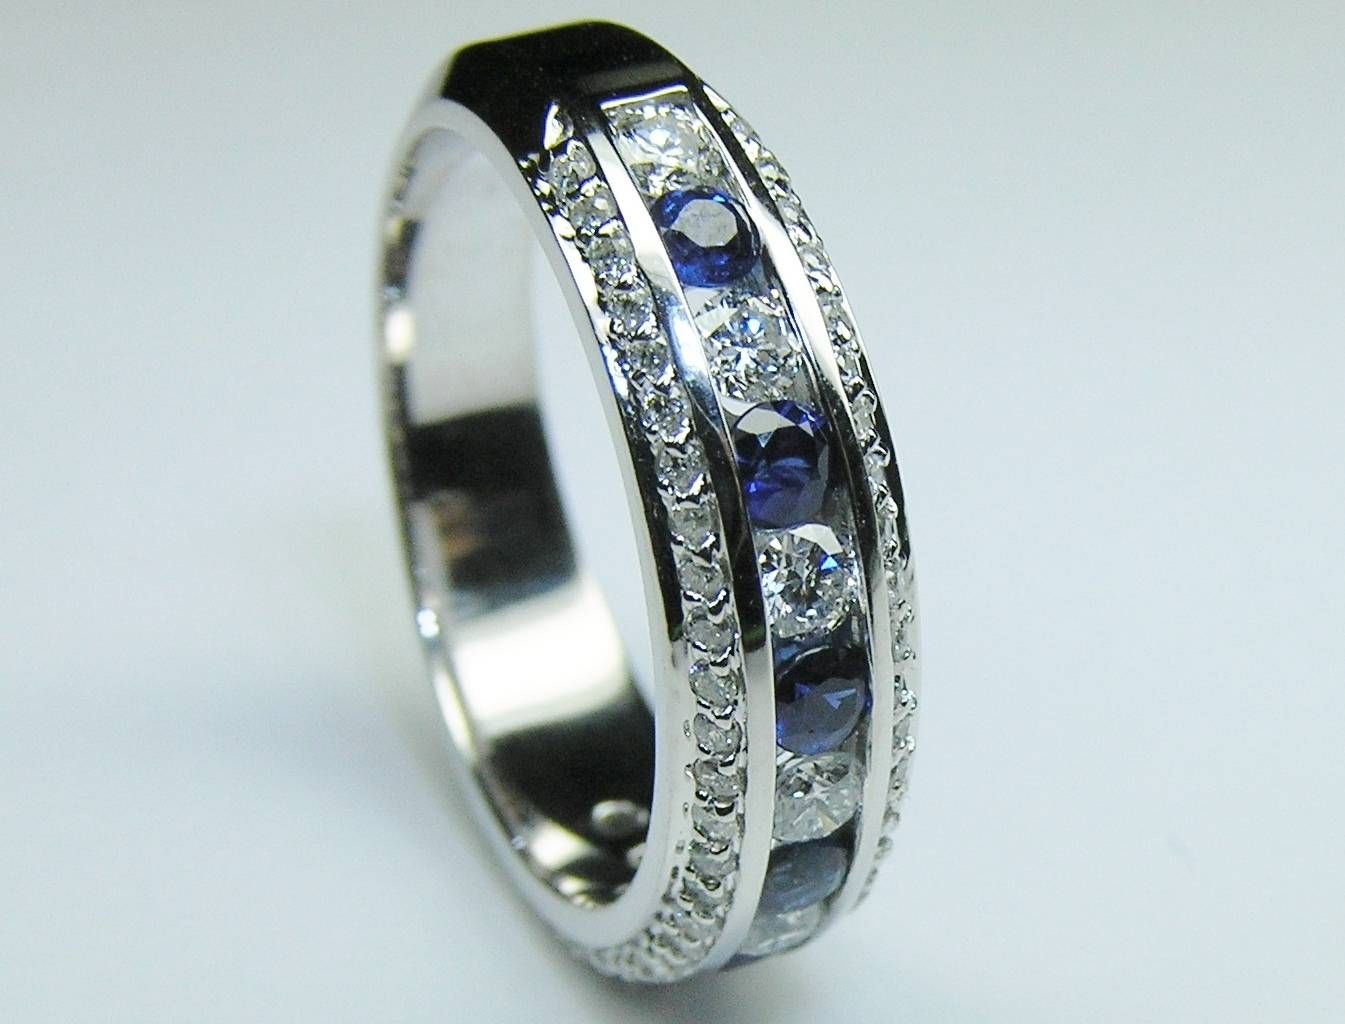 Sapphire – Wedding Bands From Mdc Diamonds Pertaining To Most Current Diamond And Sapphire Anniversary Rings (View 3 of 25)